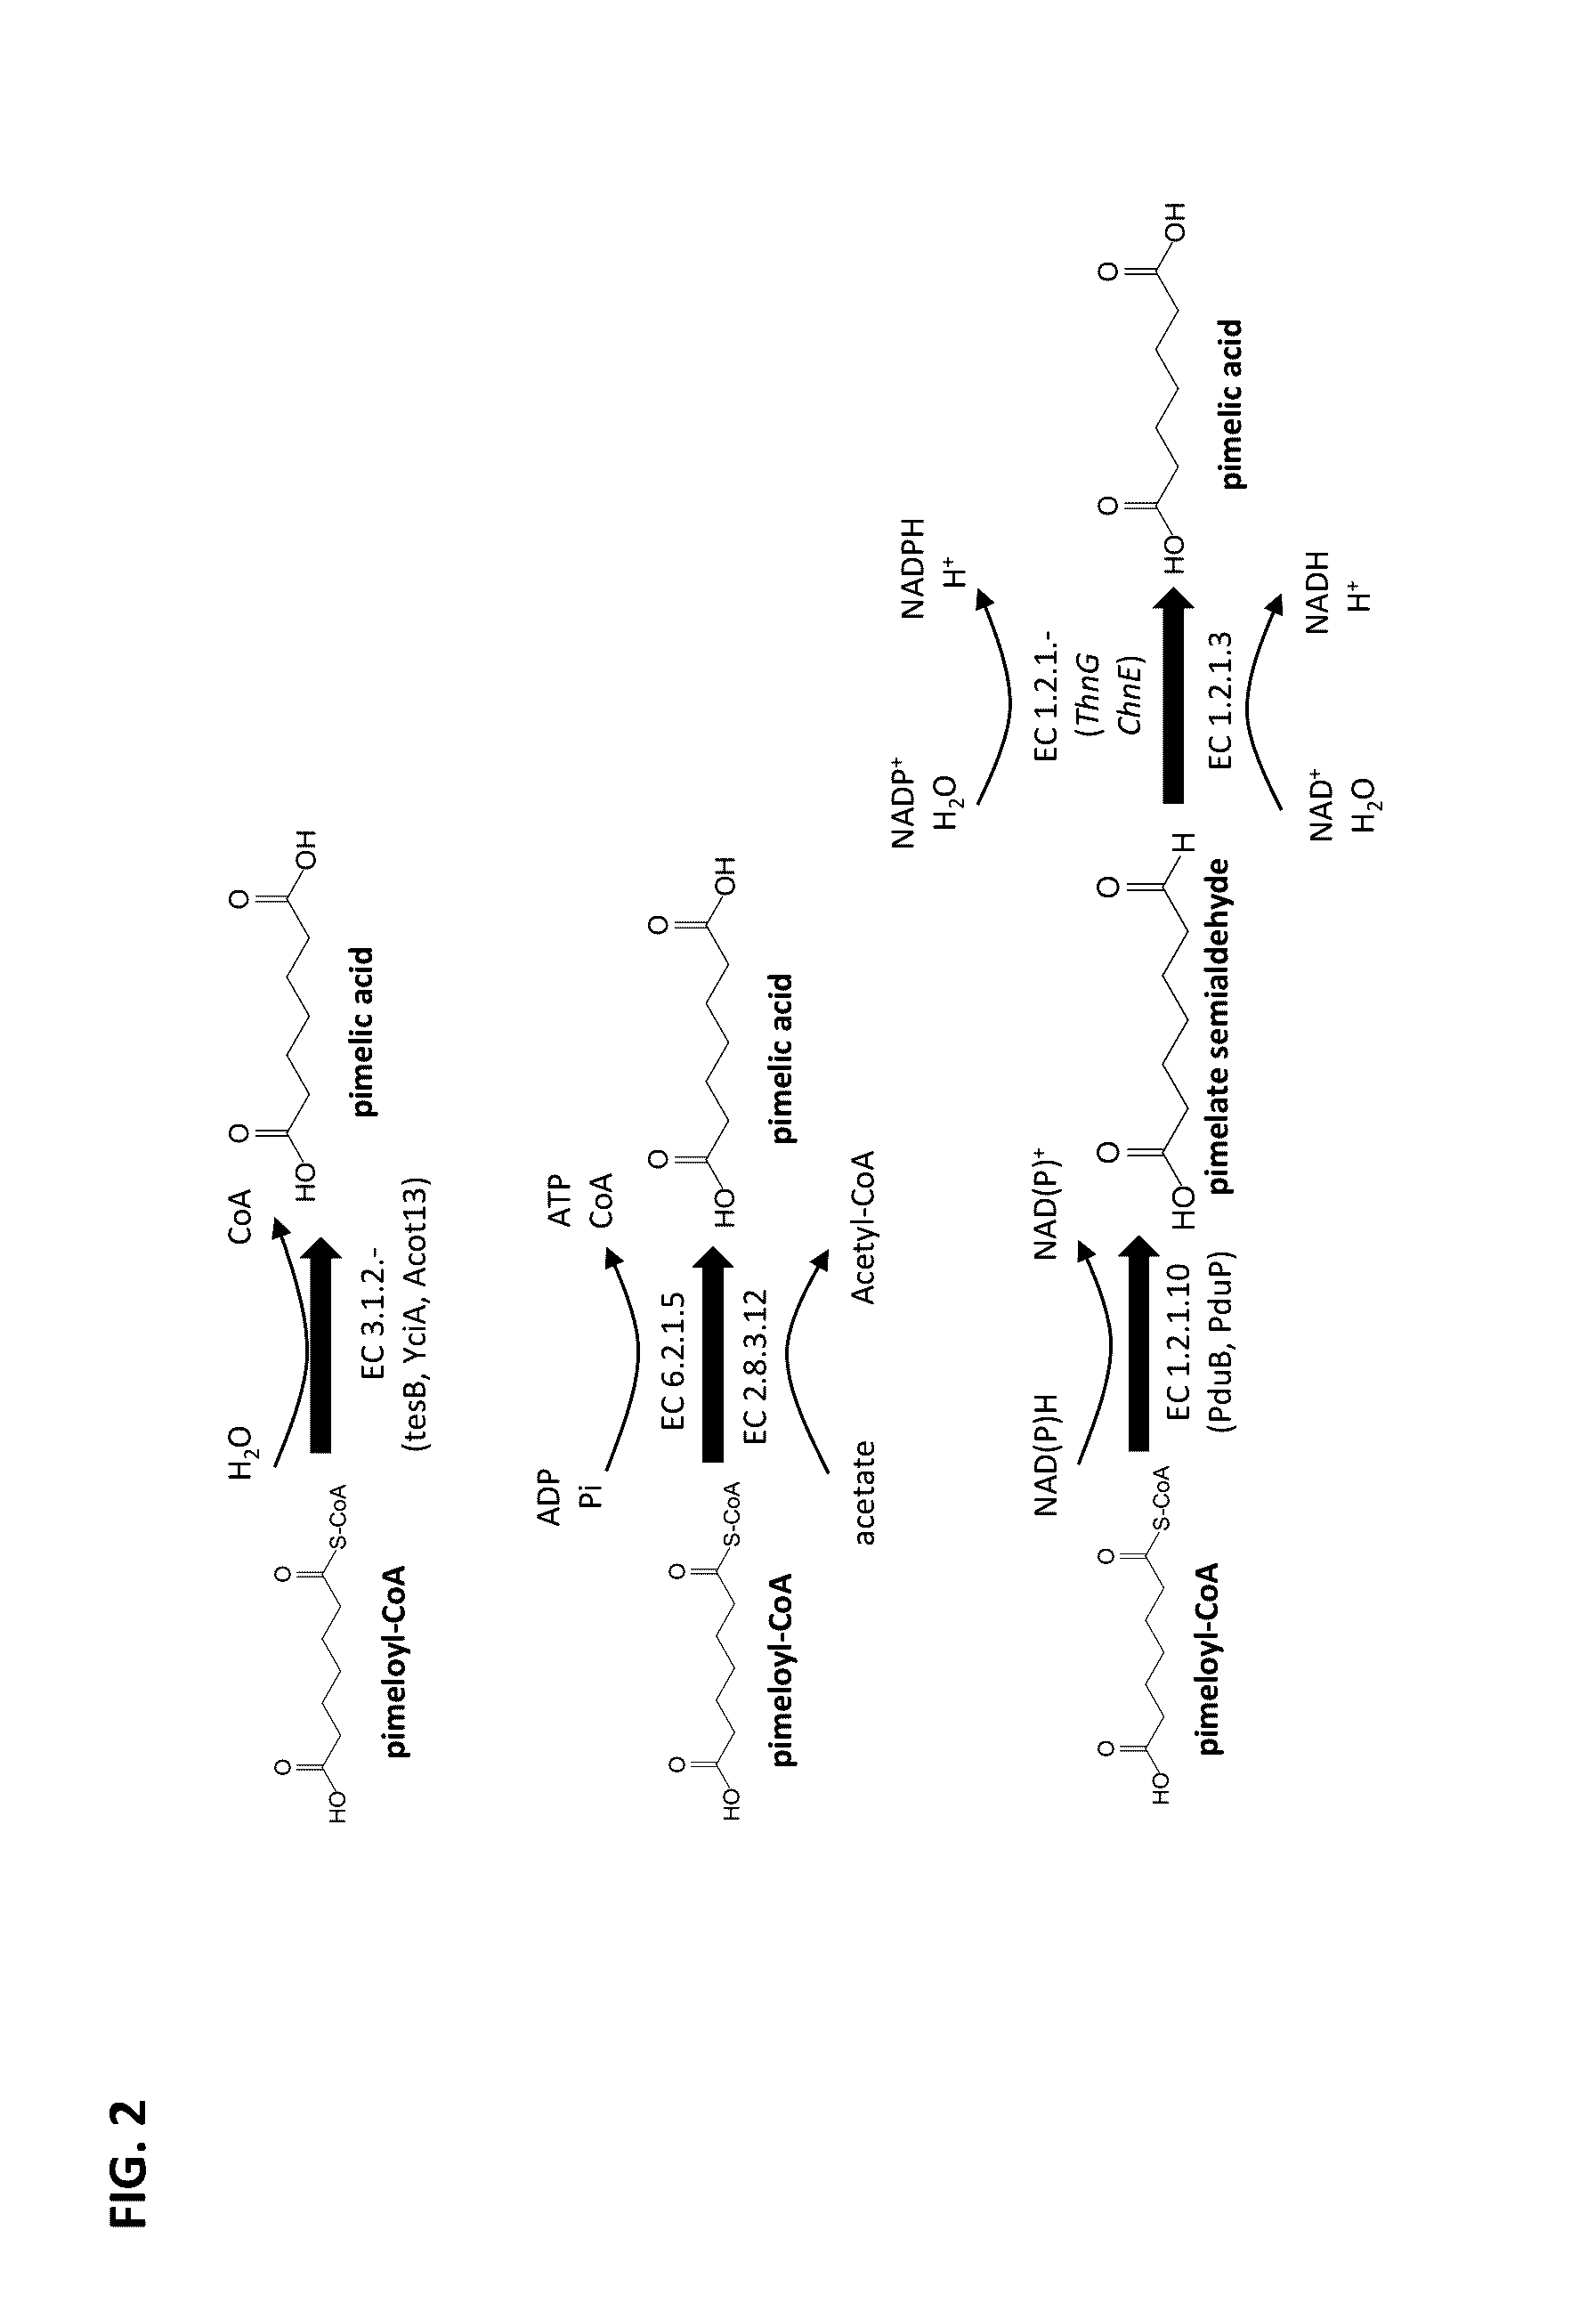 Methods of producing 7-carbon chemicals via c1 carbon chain elongation associated with coenzyme B synthesis